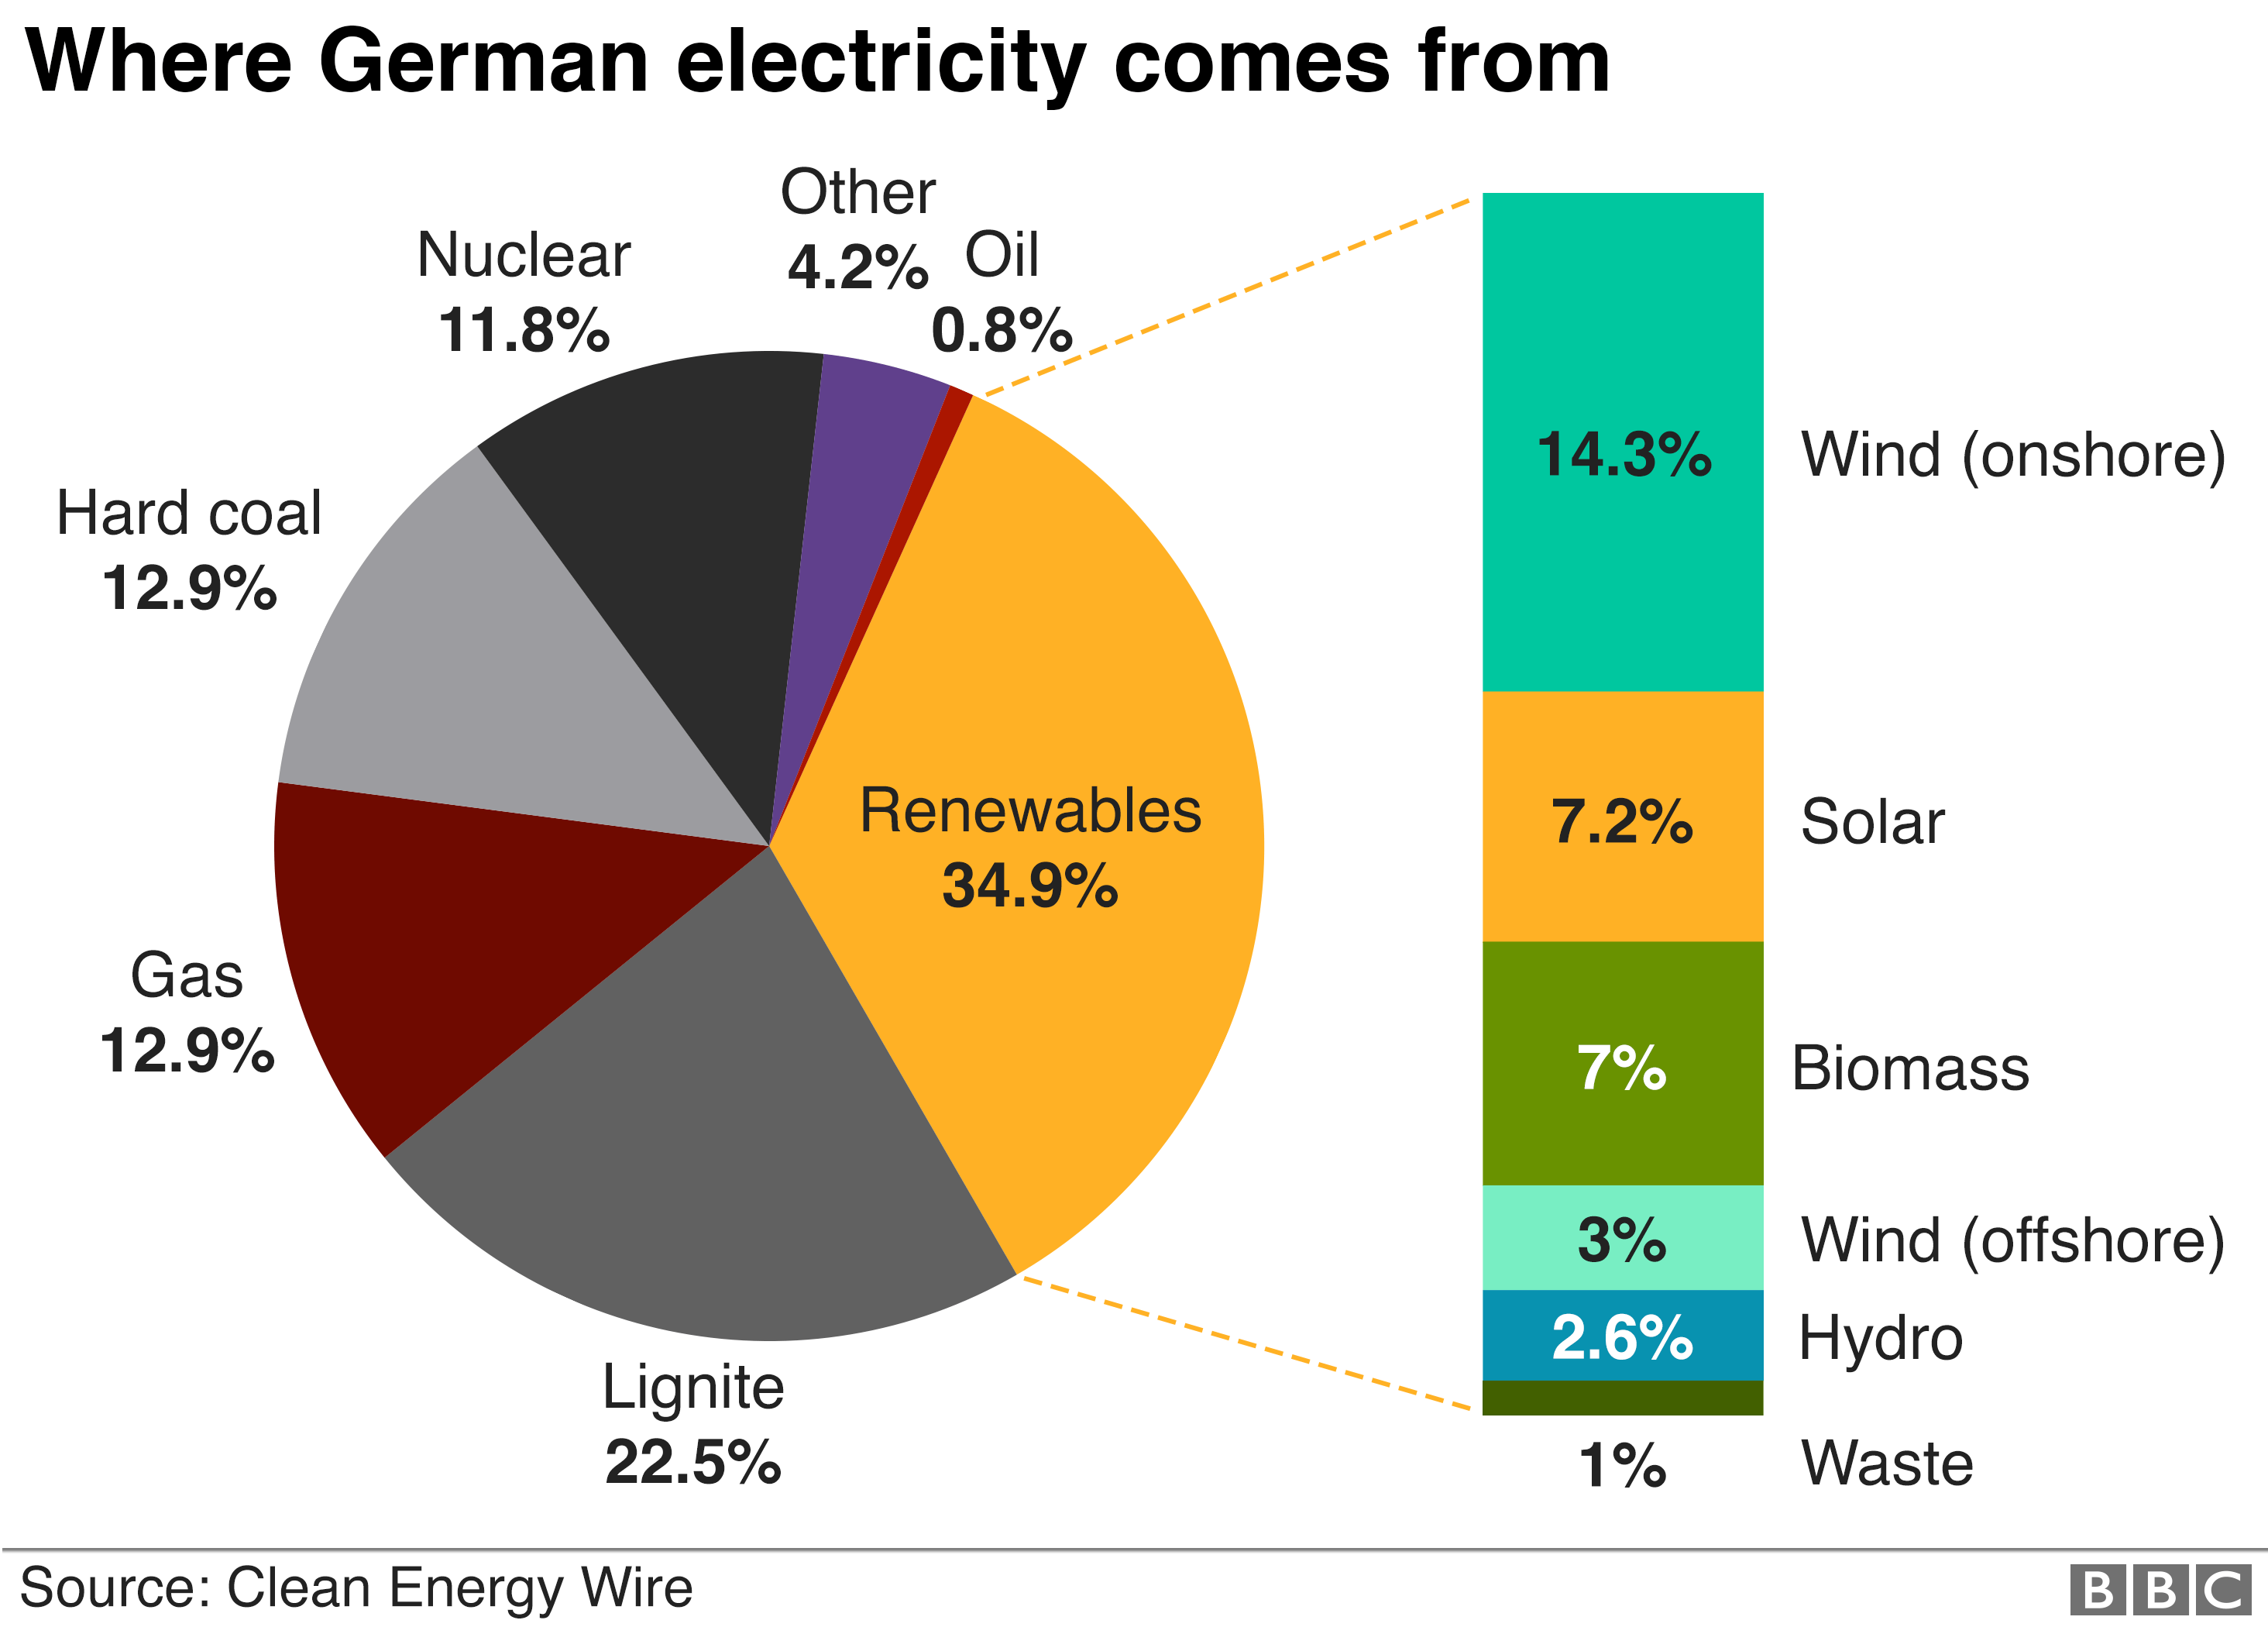 Graphic showing where German electricity comes from